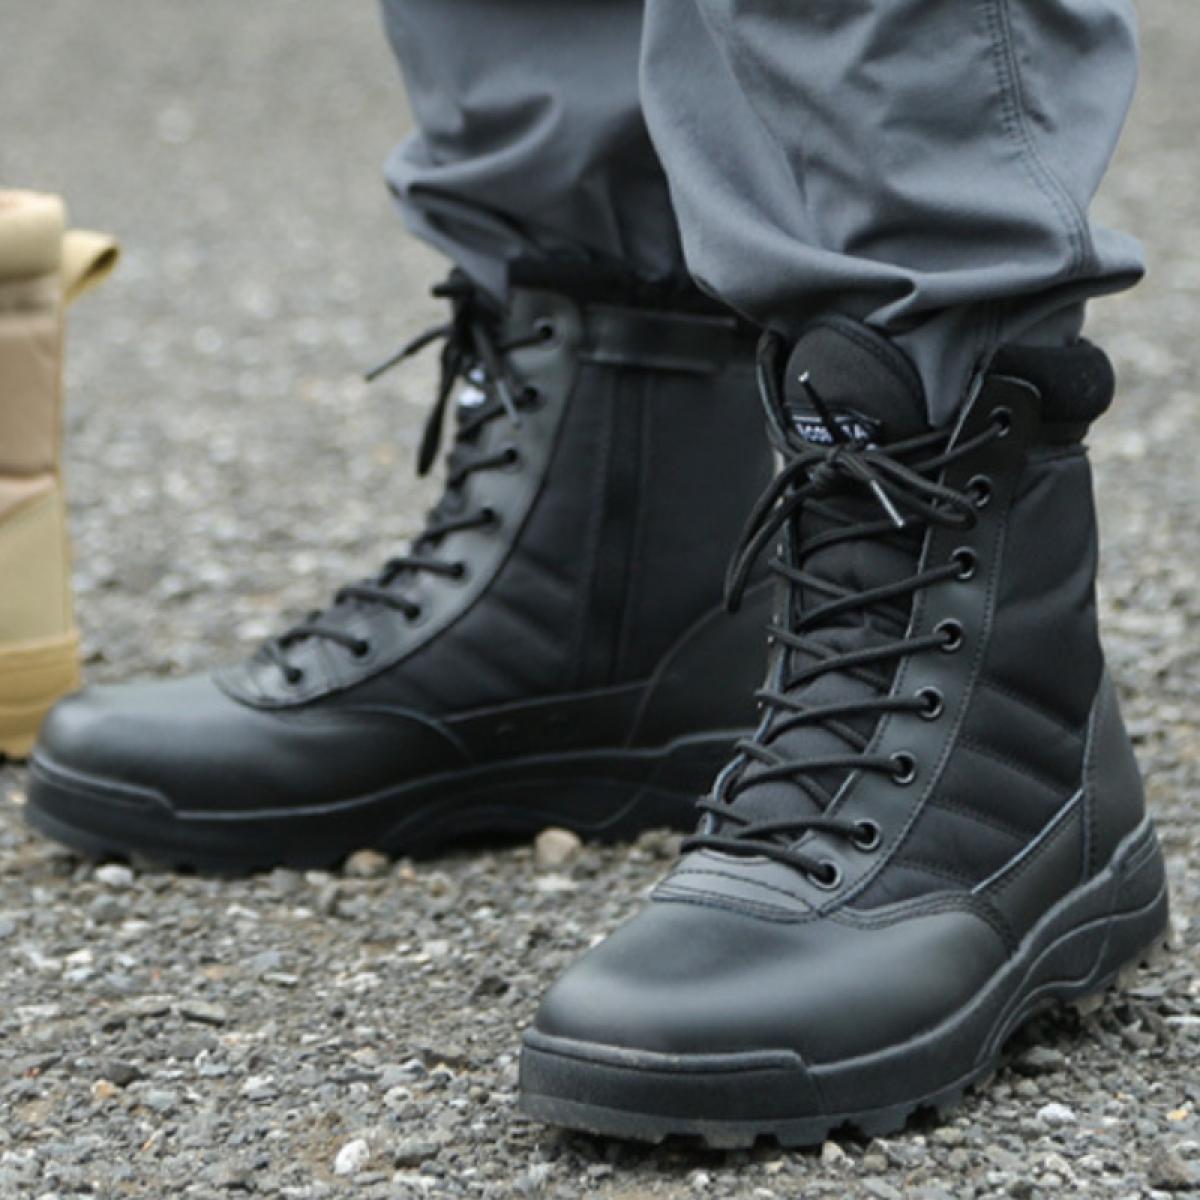 Men Tactical Military Boots Thick Soled Round Head Hiking Shoes Lace Up Desert Combat Army Boots Botas Tacticas Hombre M